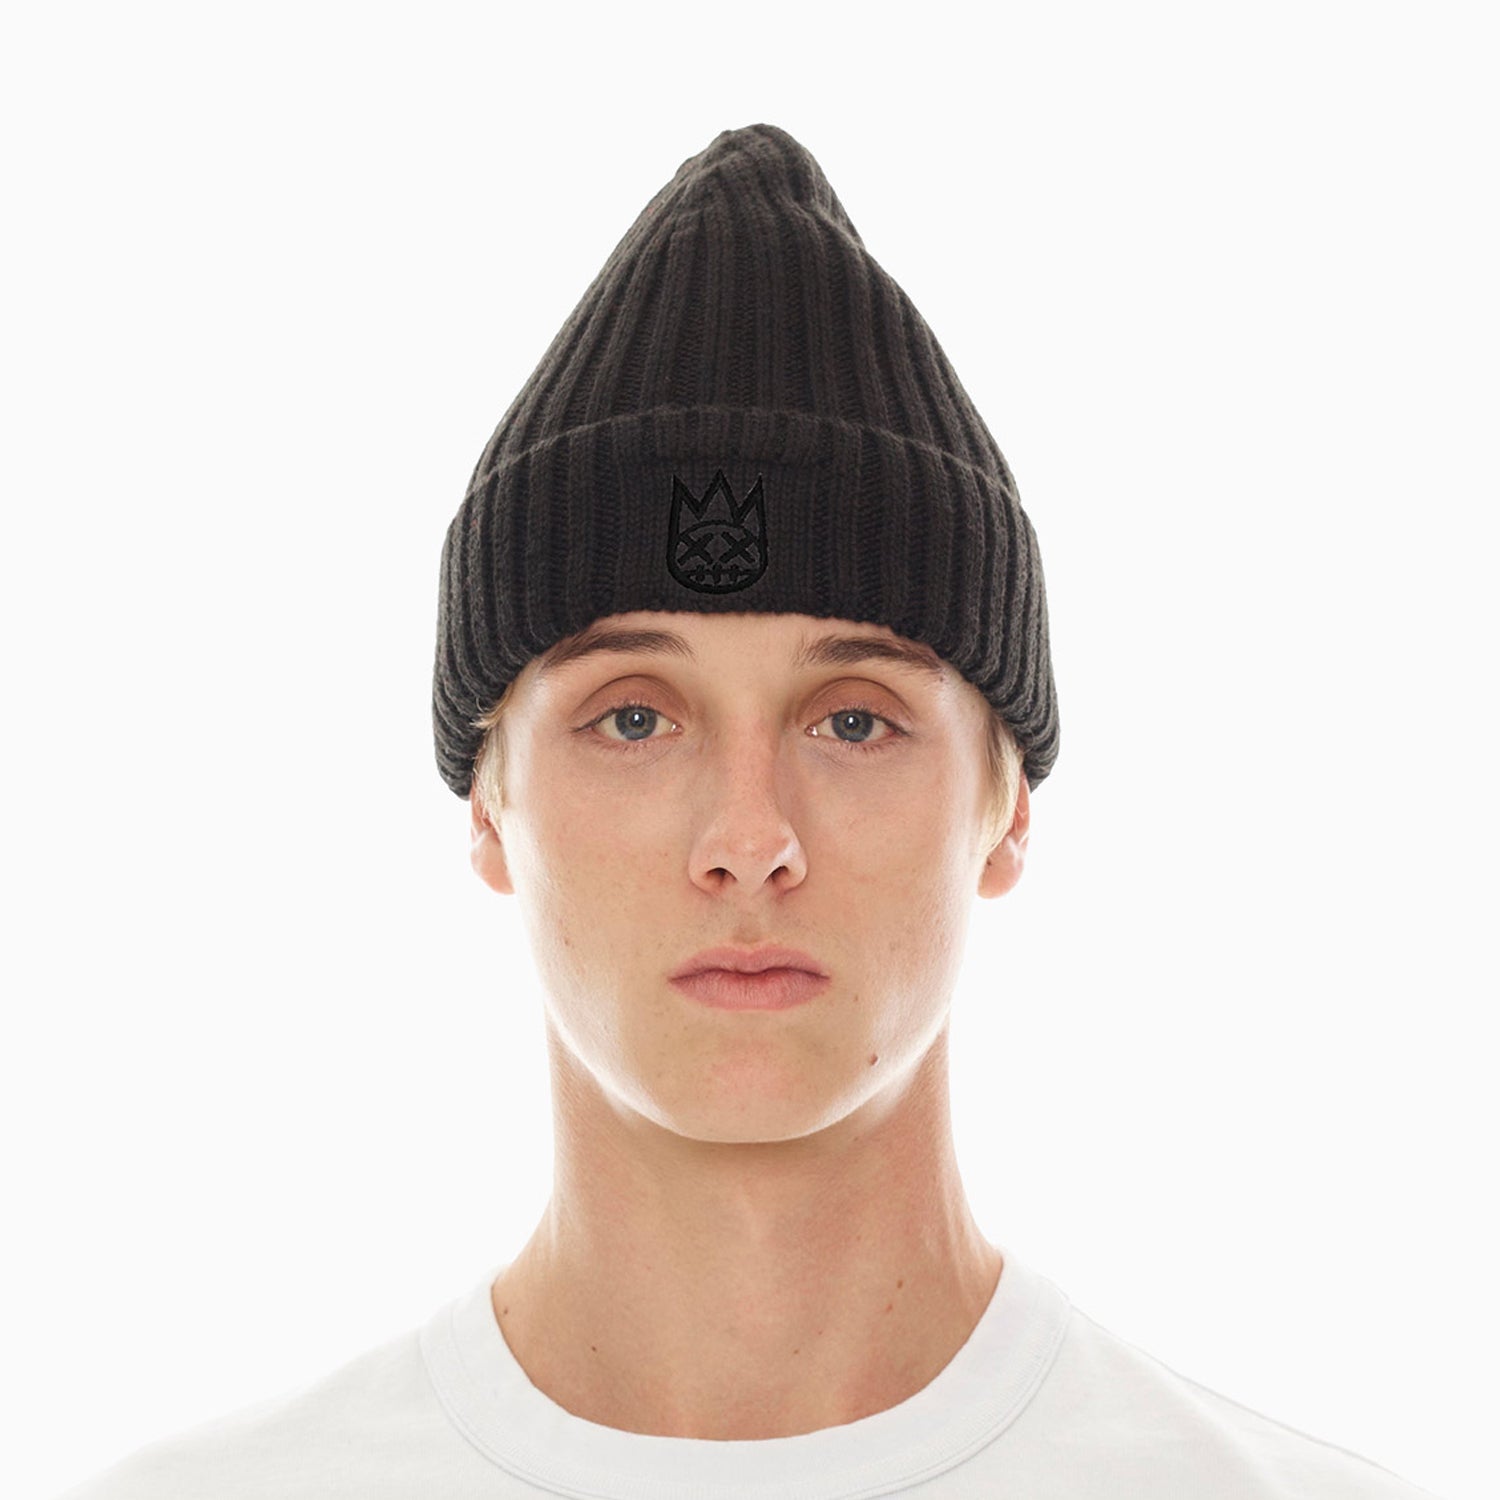 cult-of-individuality-mens-knit-hat-with-clean-2-tone-shimuchan-logo-in-black-on-black-623bc-ch96a